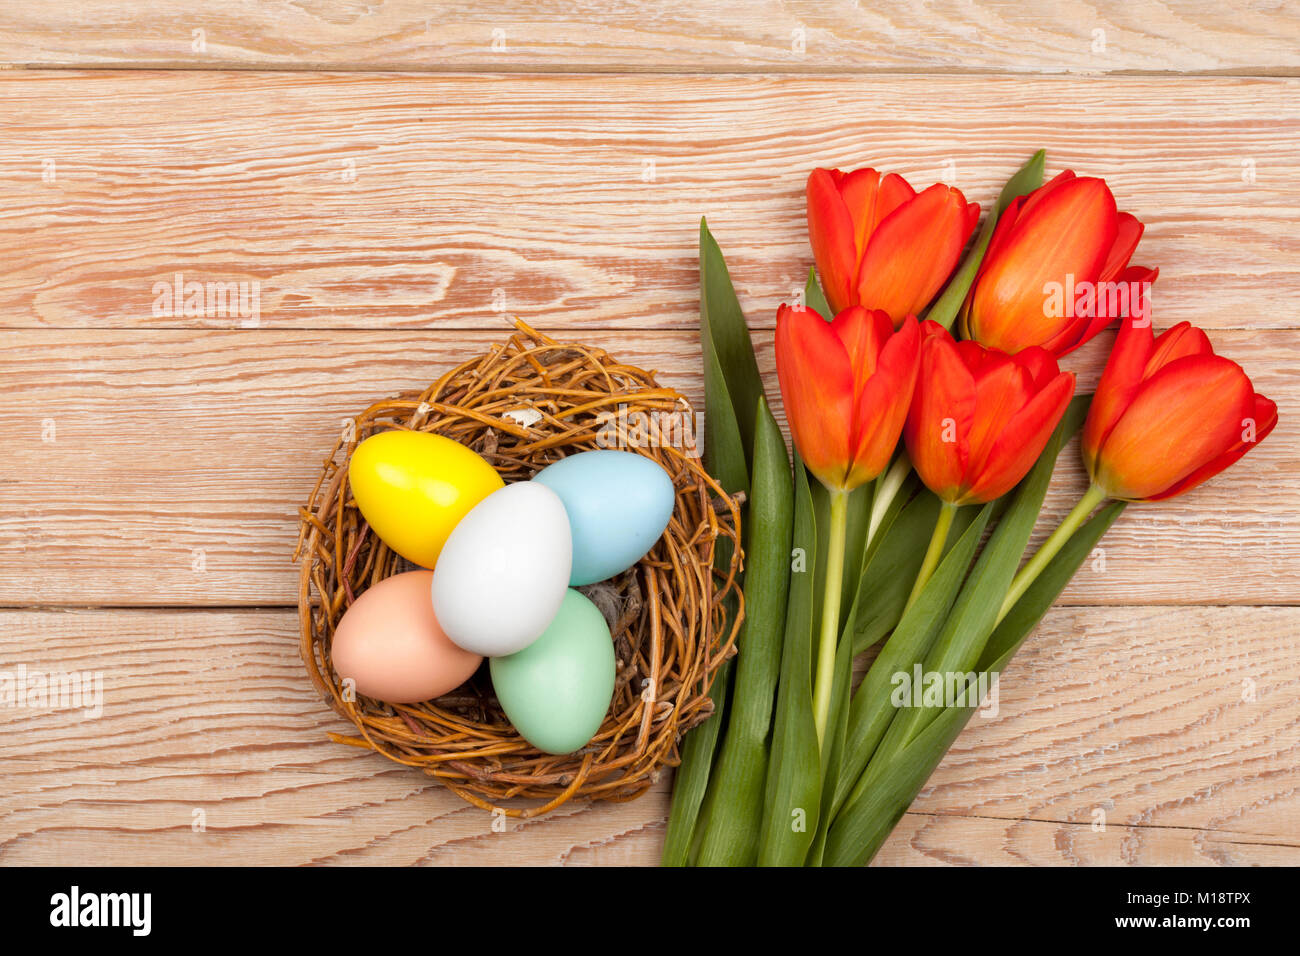 Easter Eggs in a box with colorful red tulips and pink ribbon Stock Photo